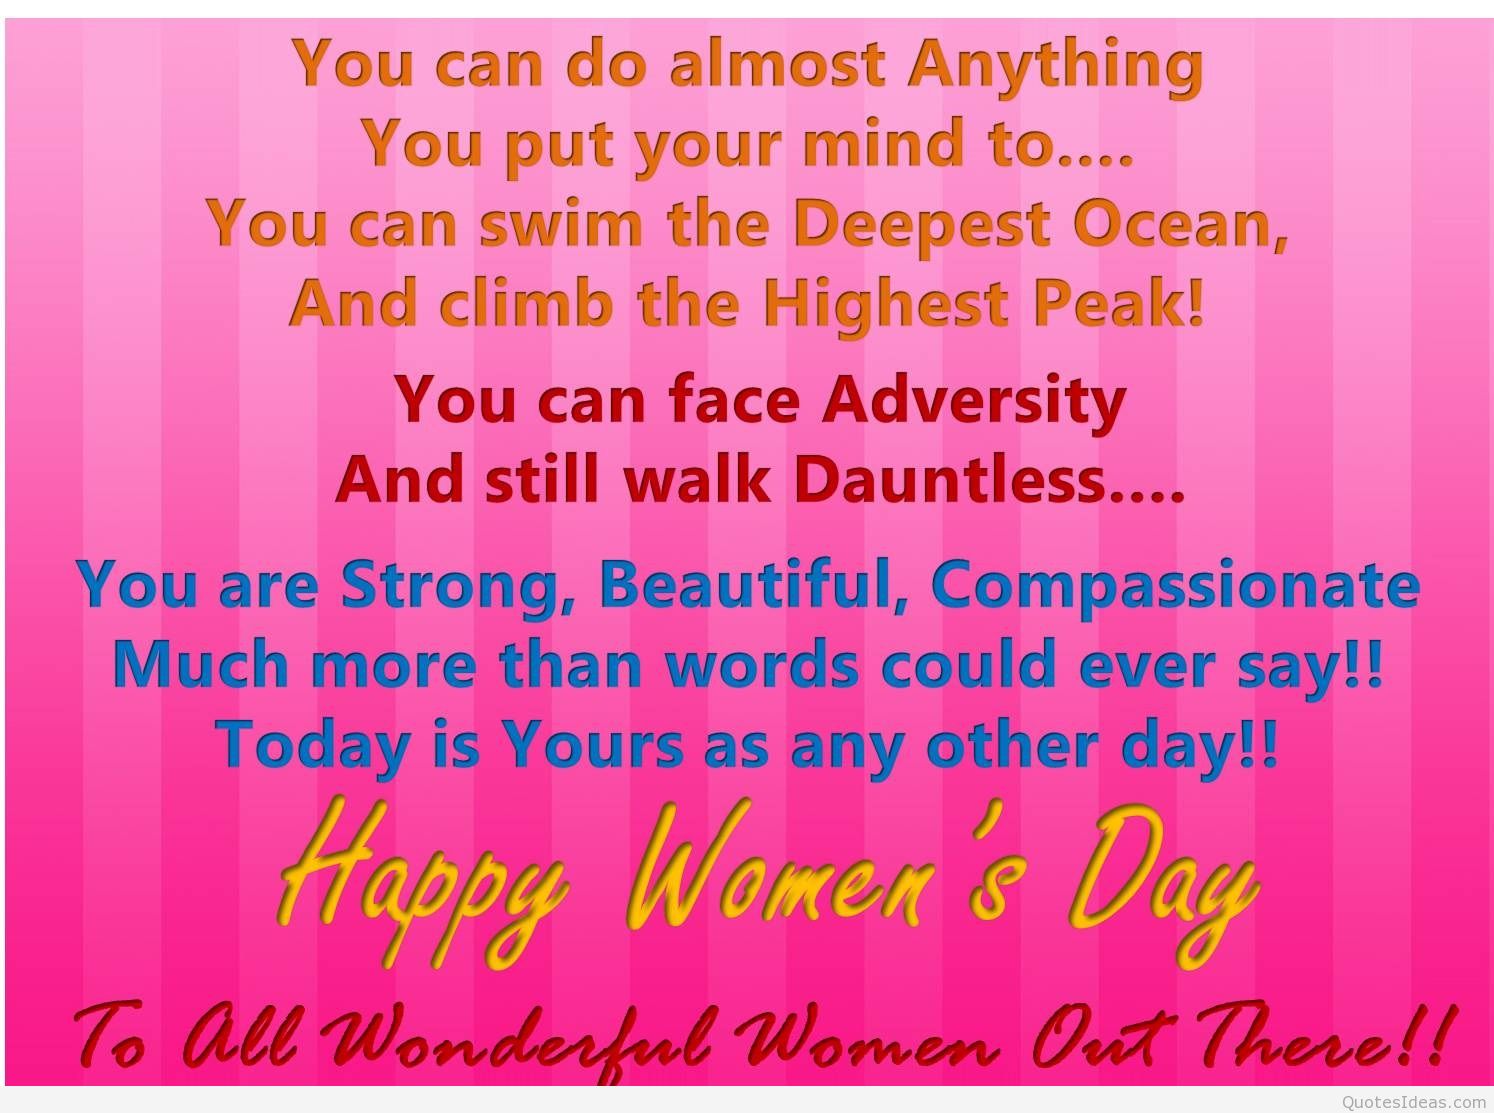 happy women's day to all wonderful women out there